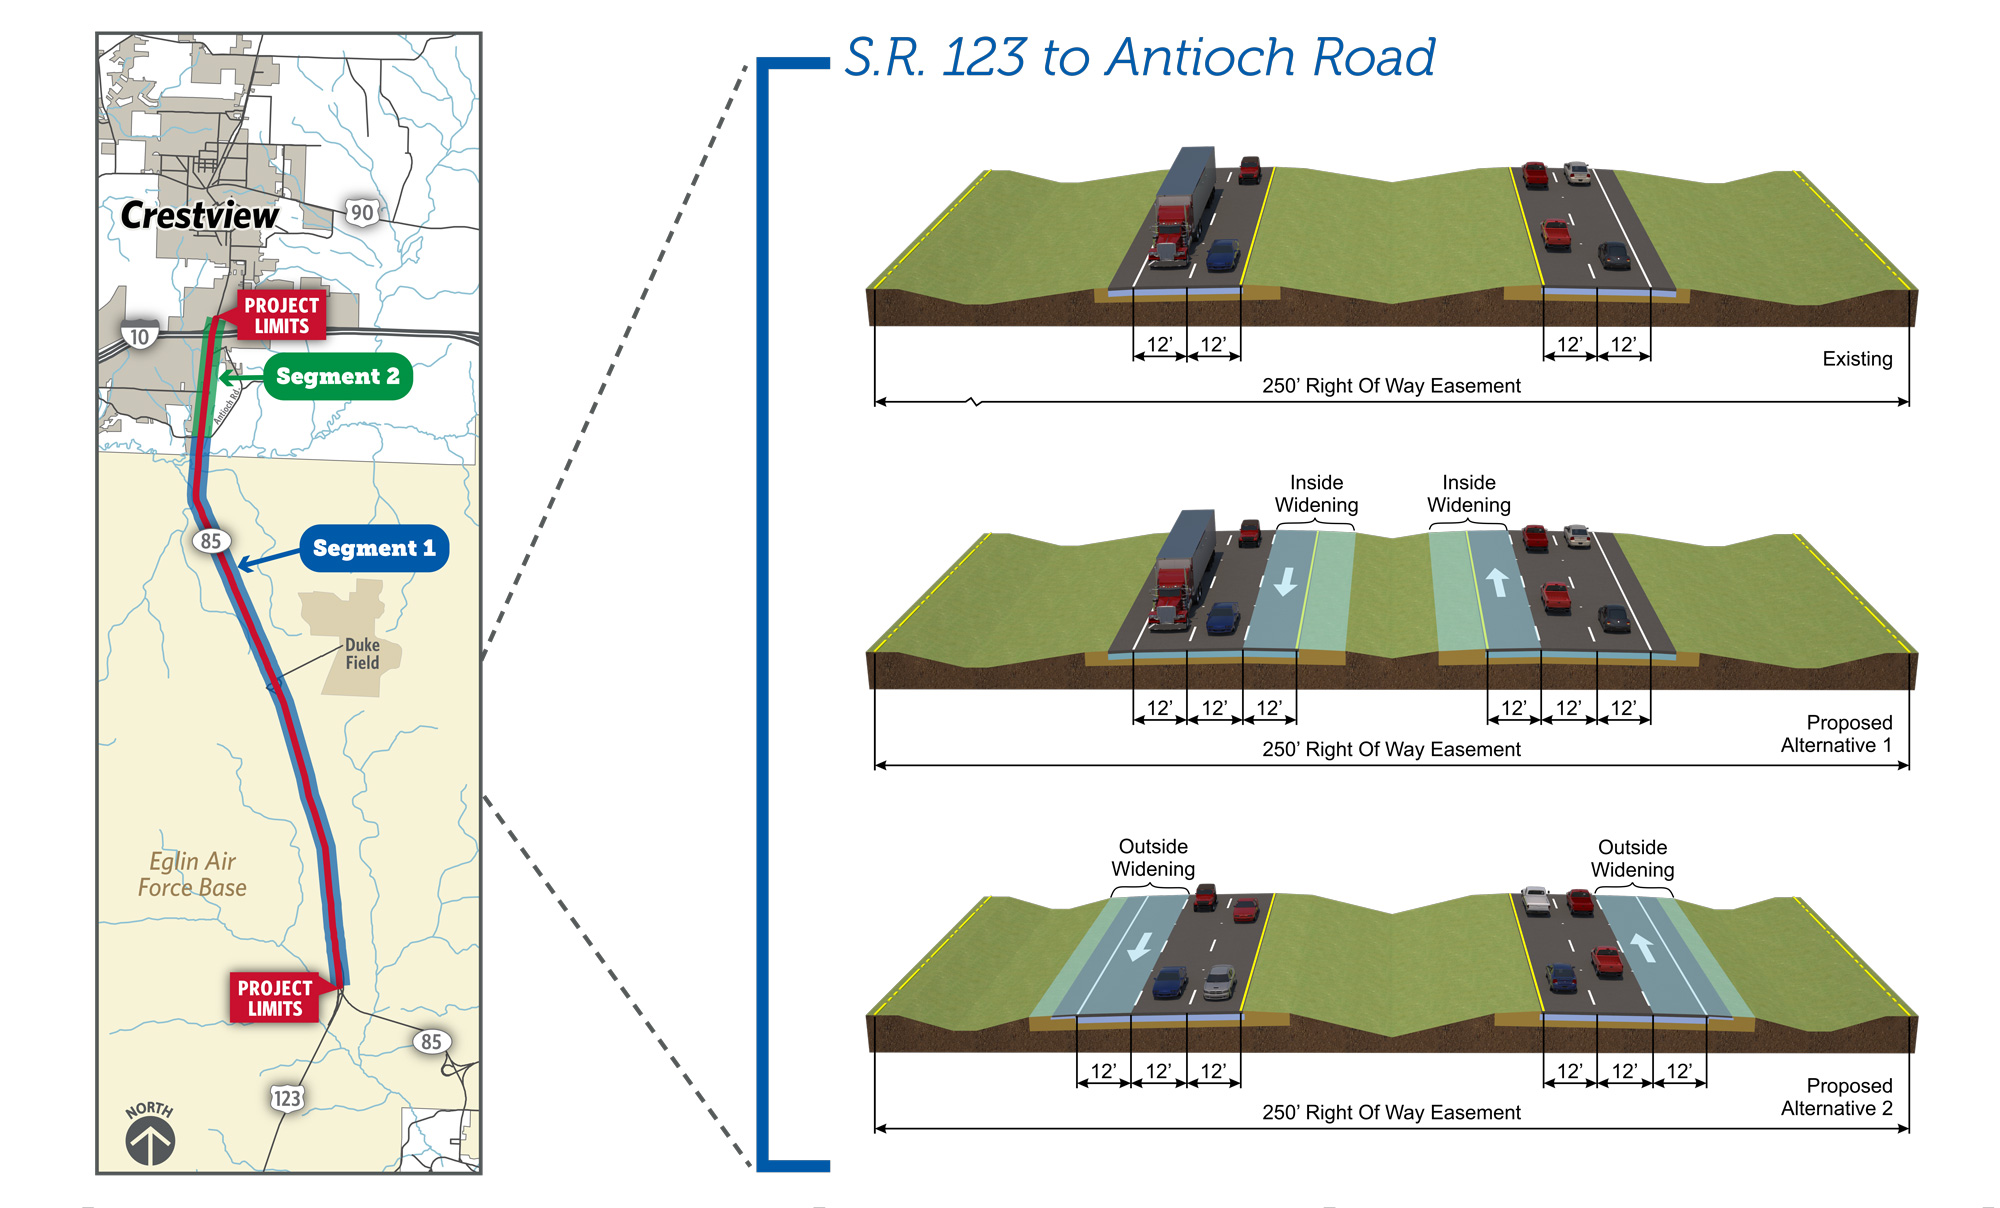 SR 123 to Antioch Rd: add another 12-foot lane to each direction of traffic on either the inside lanes of the highway or the outside lanes.